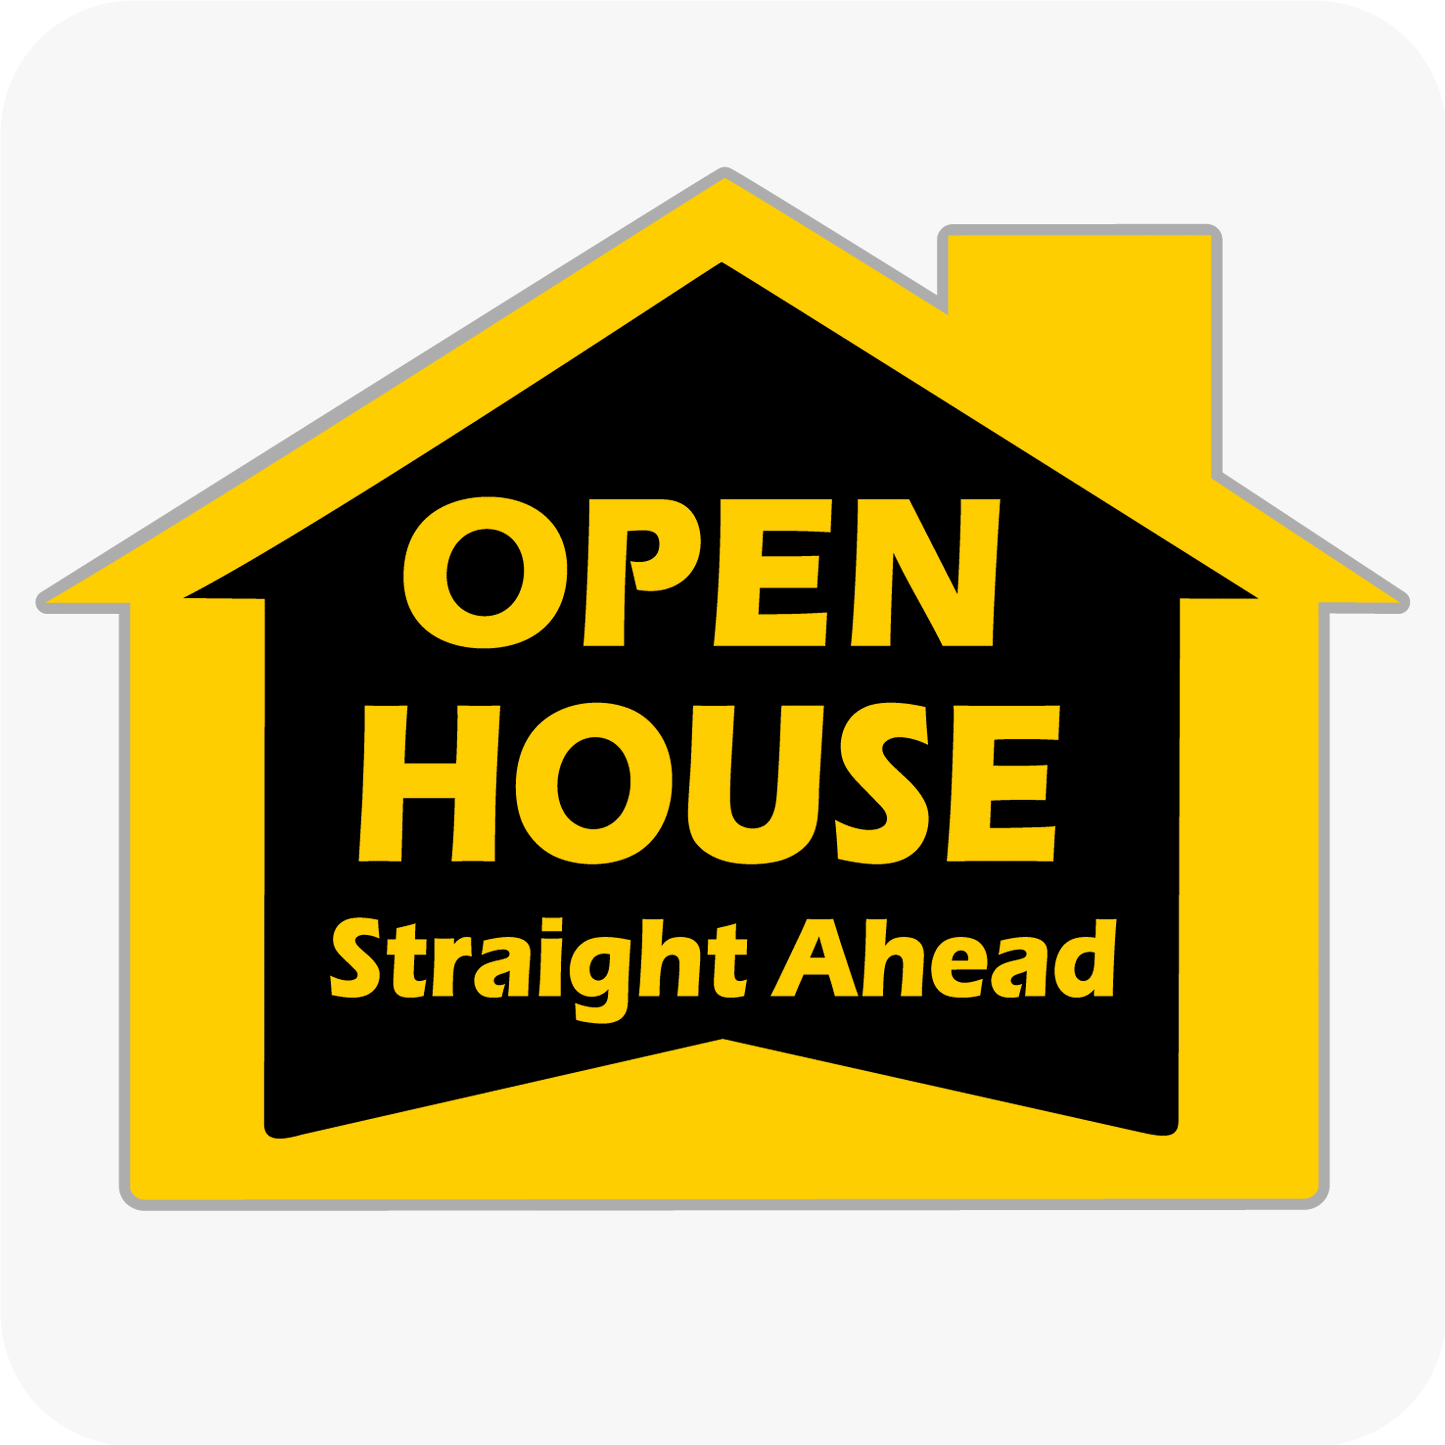 Open House Straight Ahead - House Shaped Sign 18x24 - Black and Yellow